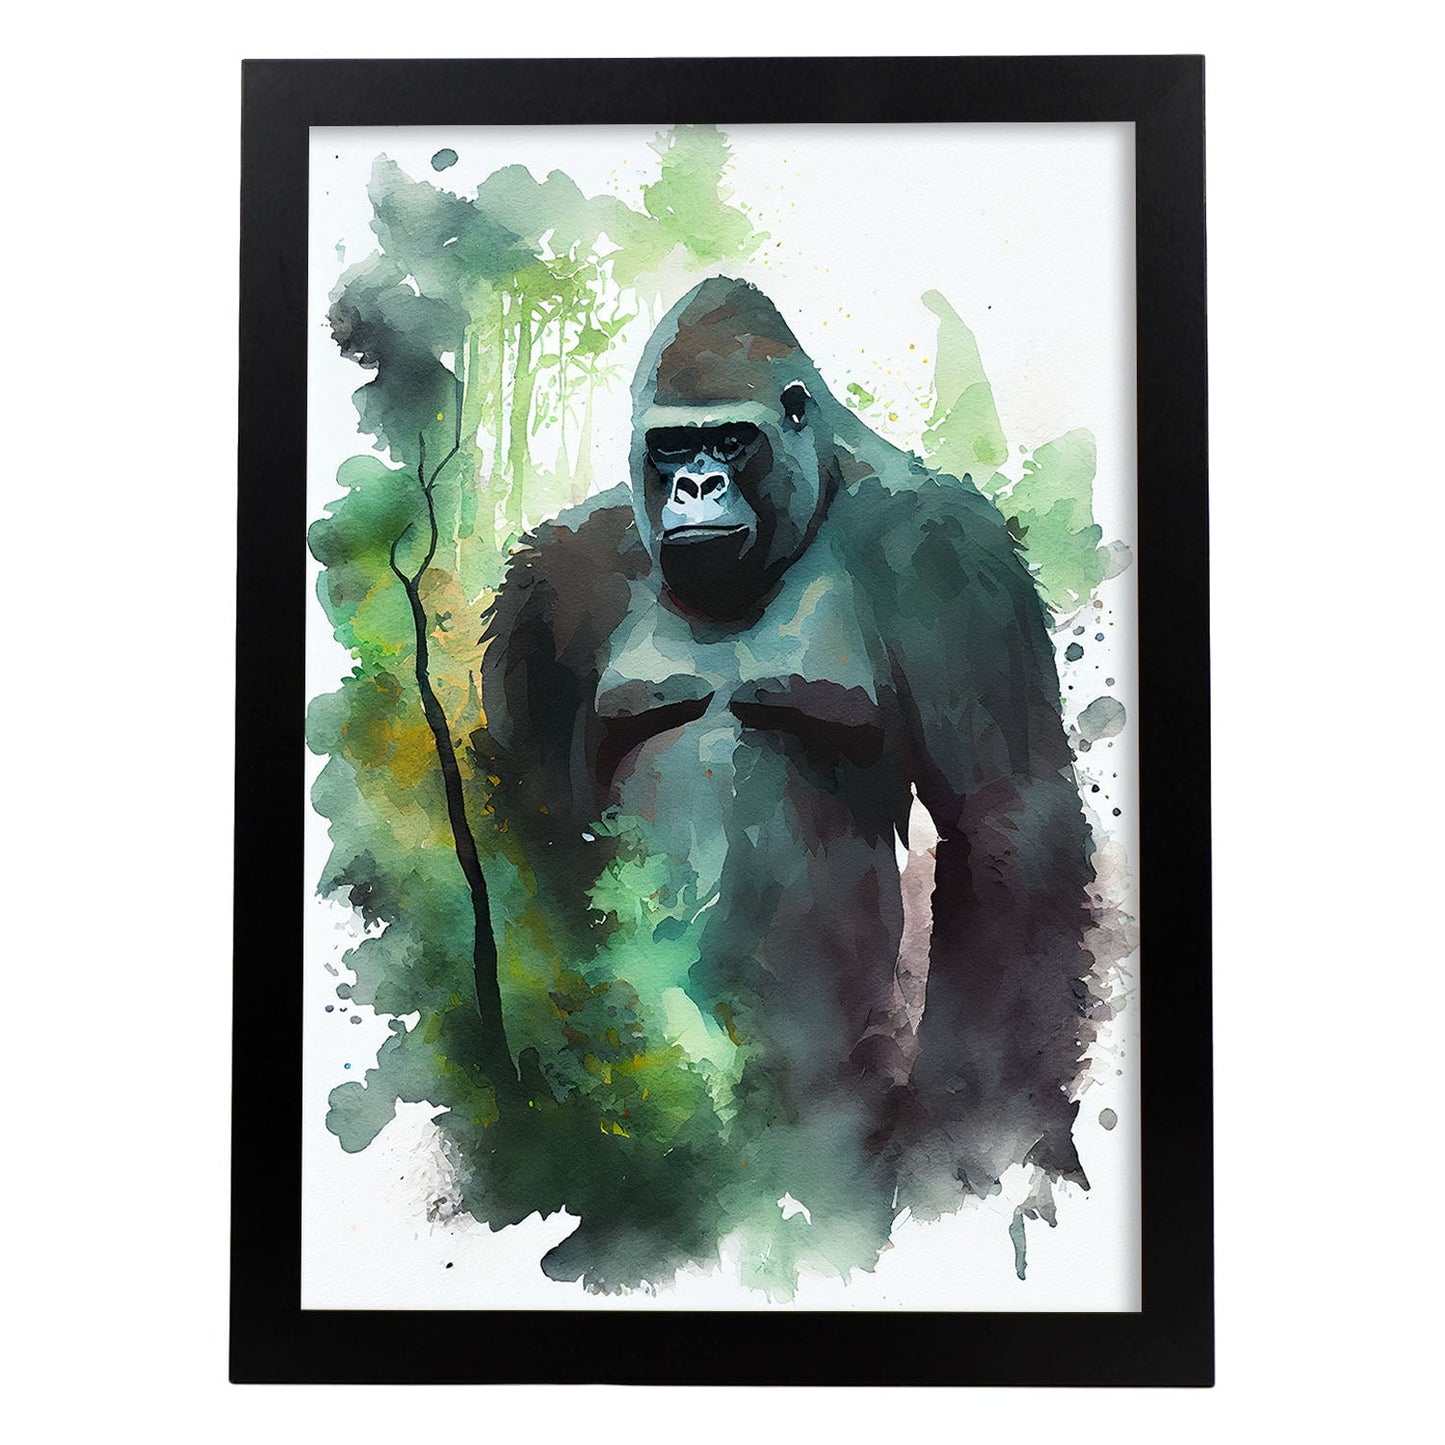 Nacnic Watercolor of Gorilla in the forest. Aesthetic Wall Art Prints for Bedroom or Living Room Design.